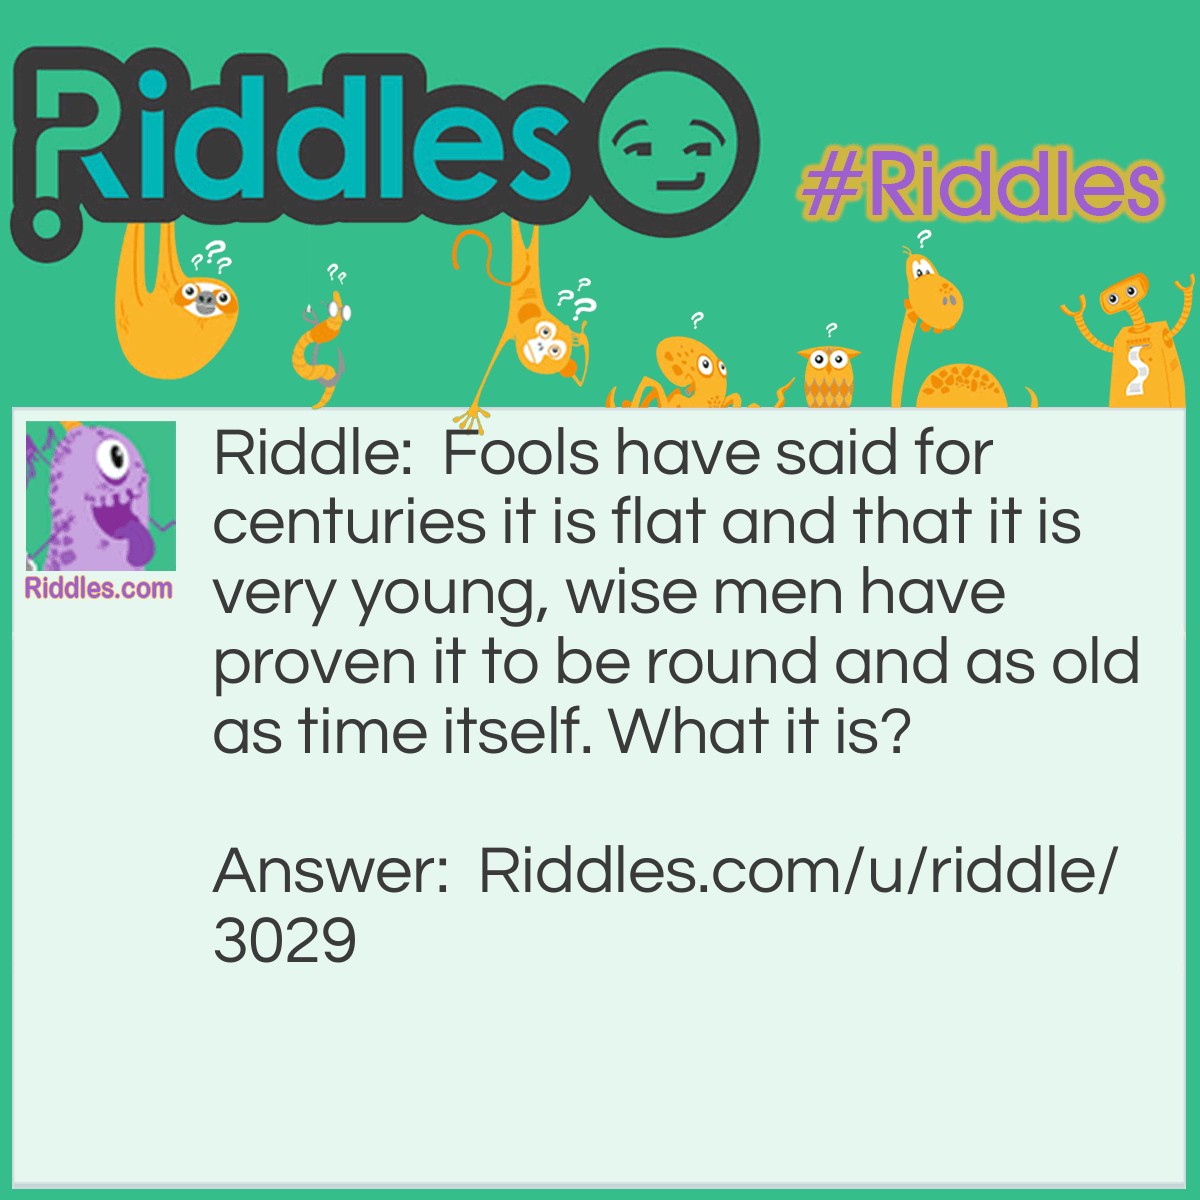 Riddle: Fools have said for centuries it is flat and that it is very young, wise men have proven it to be round and as old as time itself. What it is? Answer: The Earth.